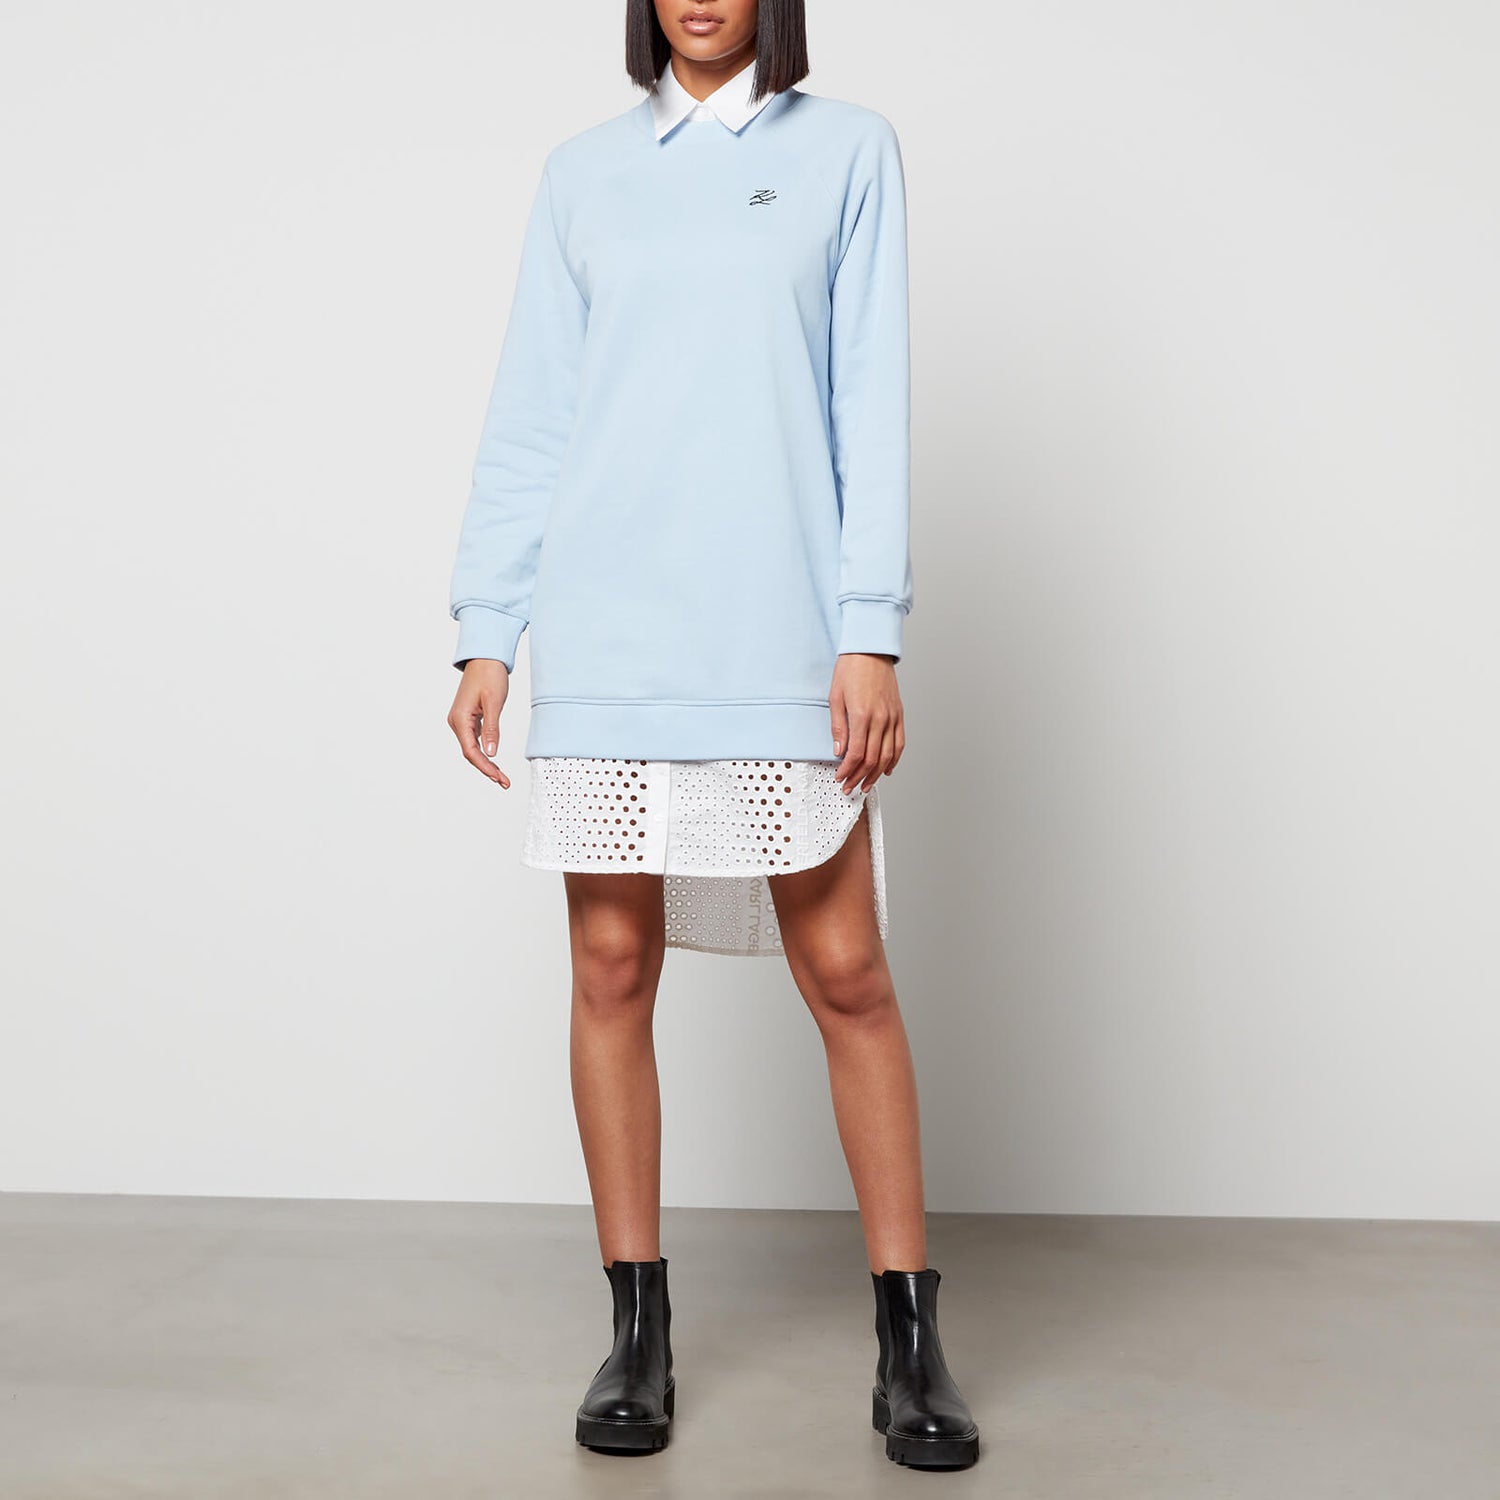 KARL LAGERFELD Women's Broderie Anglaise Sweat Dress - Blue/White - L